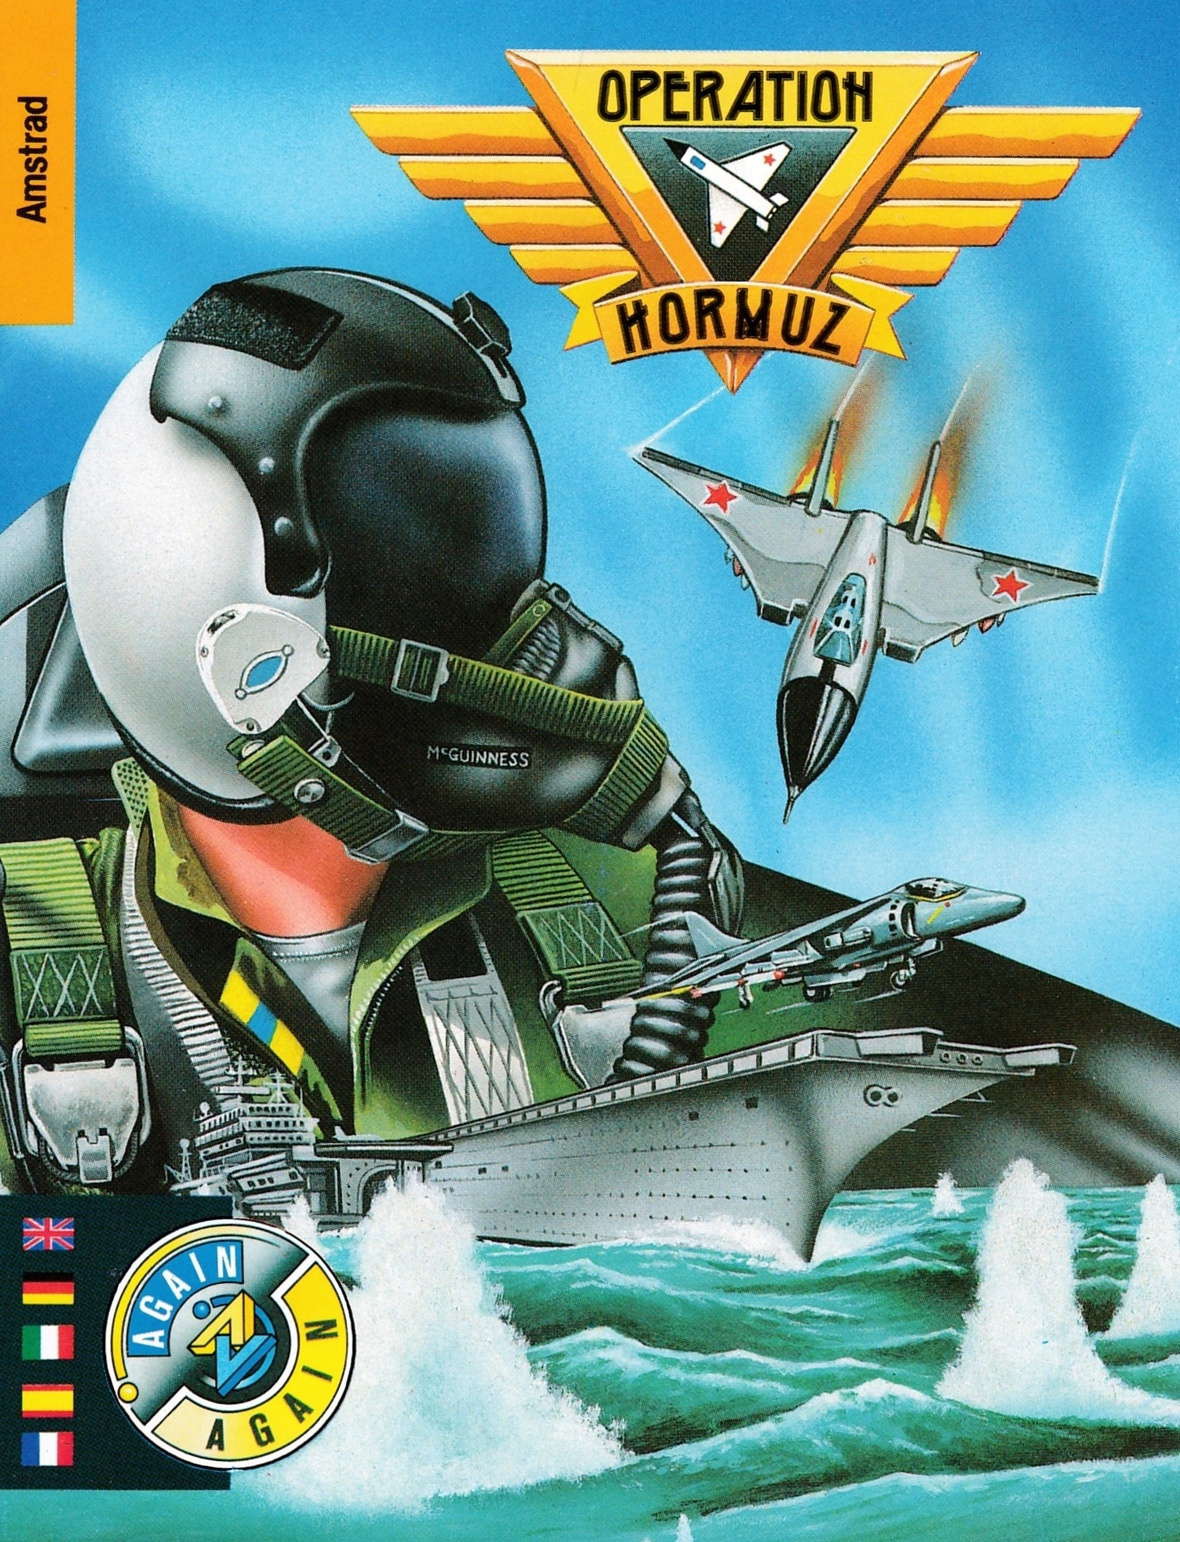 cover of the Amstrad CPC game Operation Hormuz  by GameBase CPC